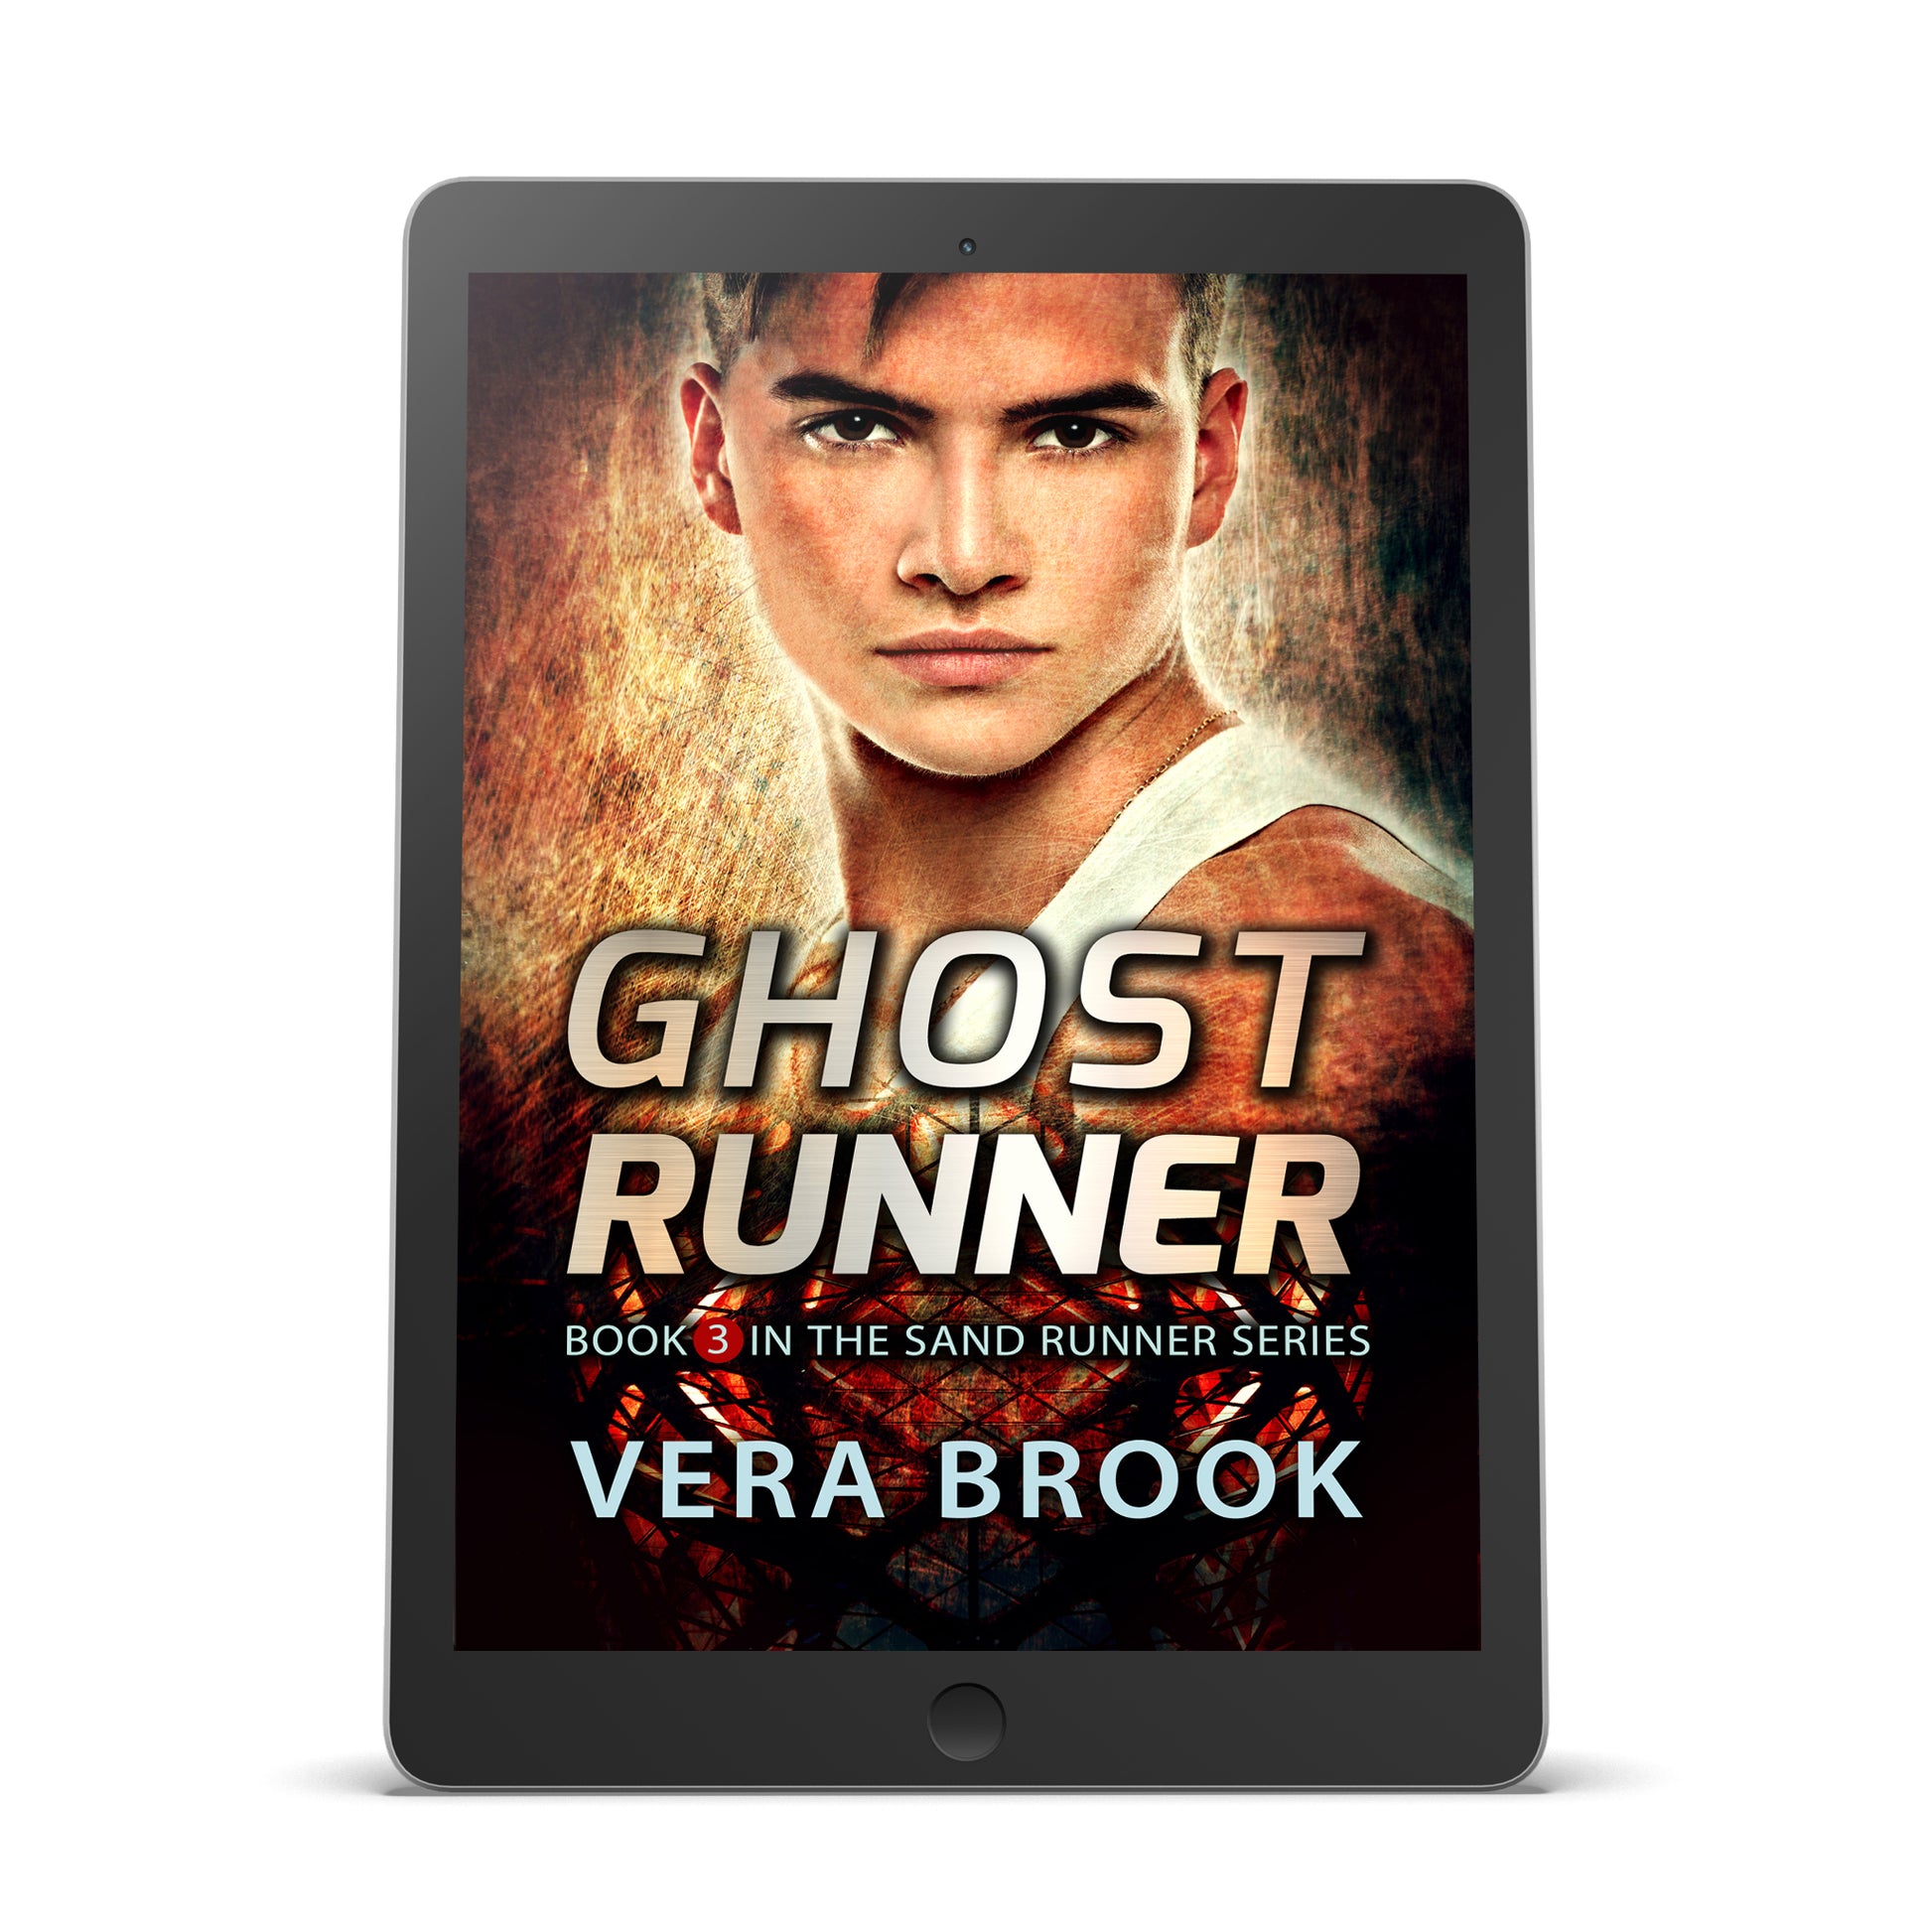 Ebook cover of GHOST RUNNER, a dystopian young adult novel by Vera Brook. Book 3 in the Sand Runner Series. The cover shows an athletic, handsome, determined young man superimposed on an ominous-looking metal structure that glows red. The title is in block metallic letters.